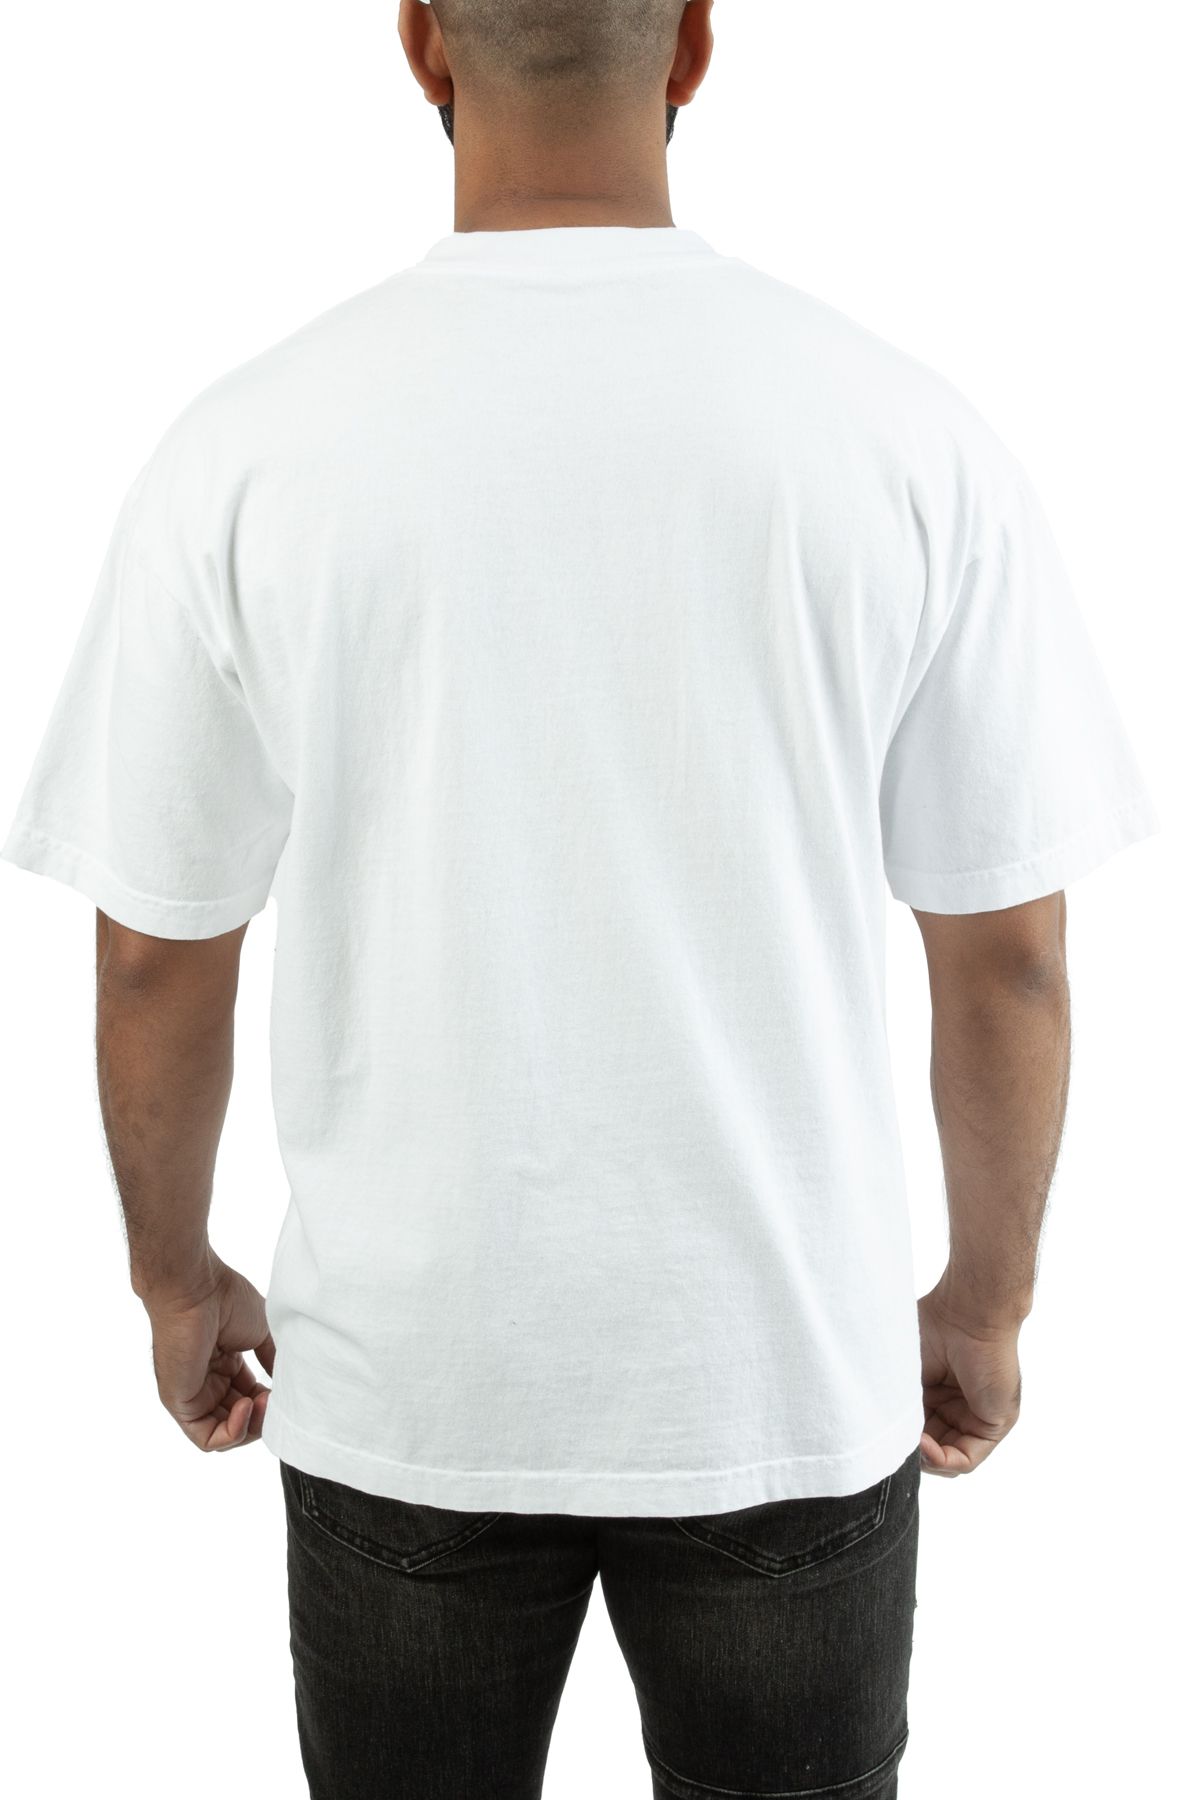 Fitted Logo T-Shirt 102, White